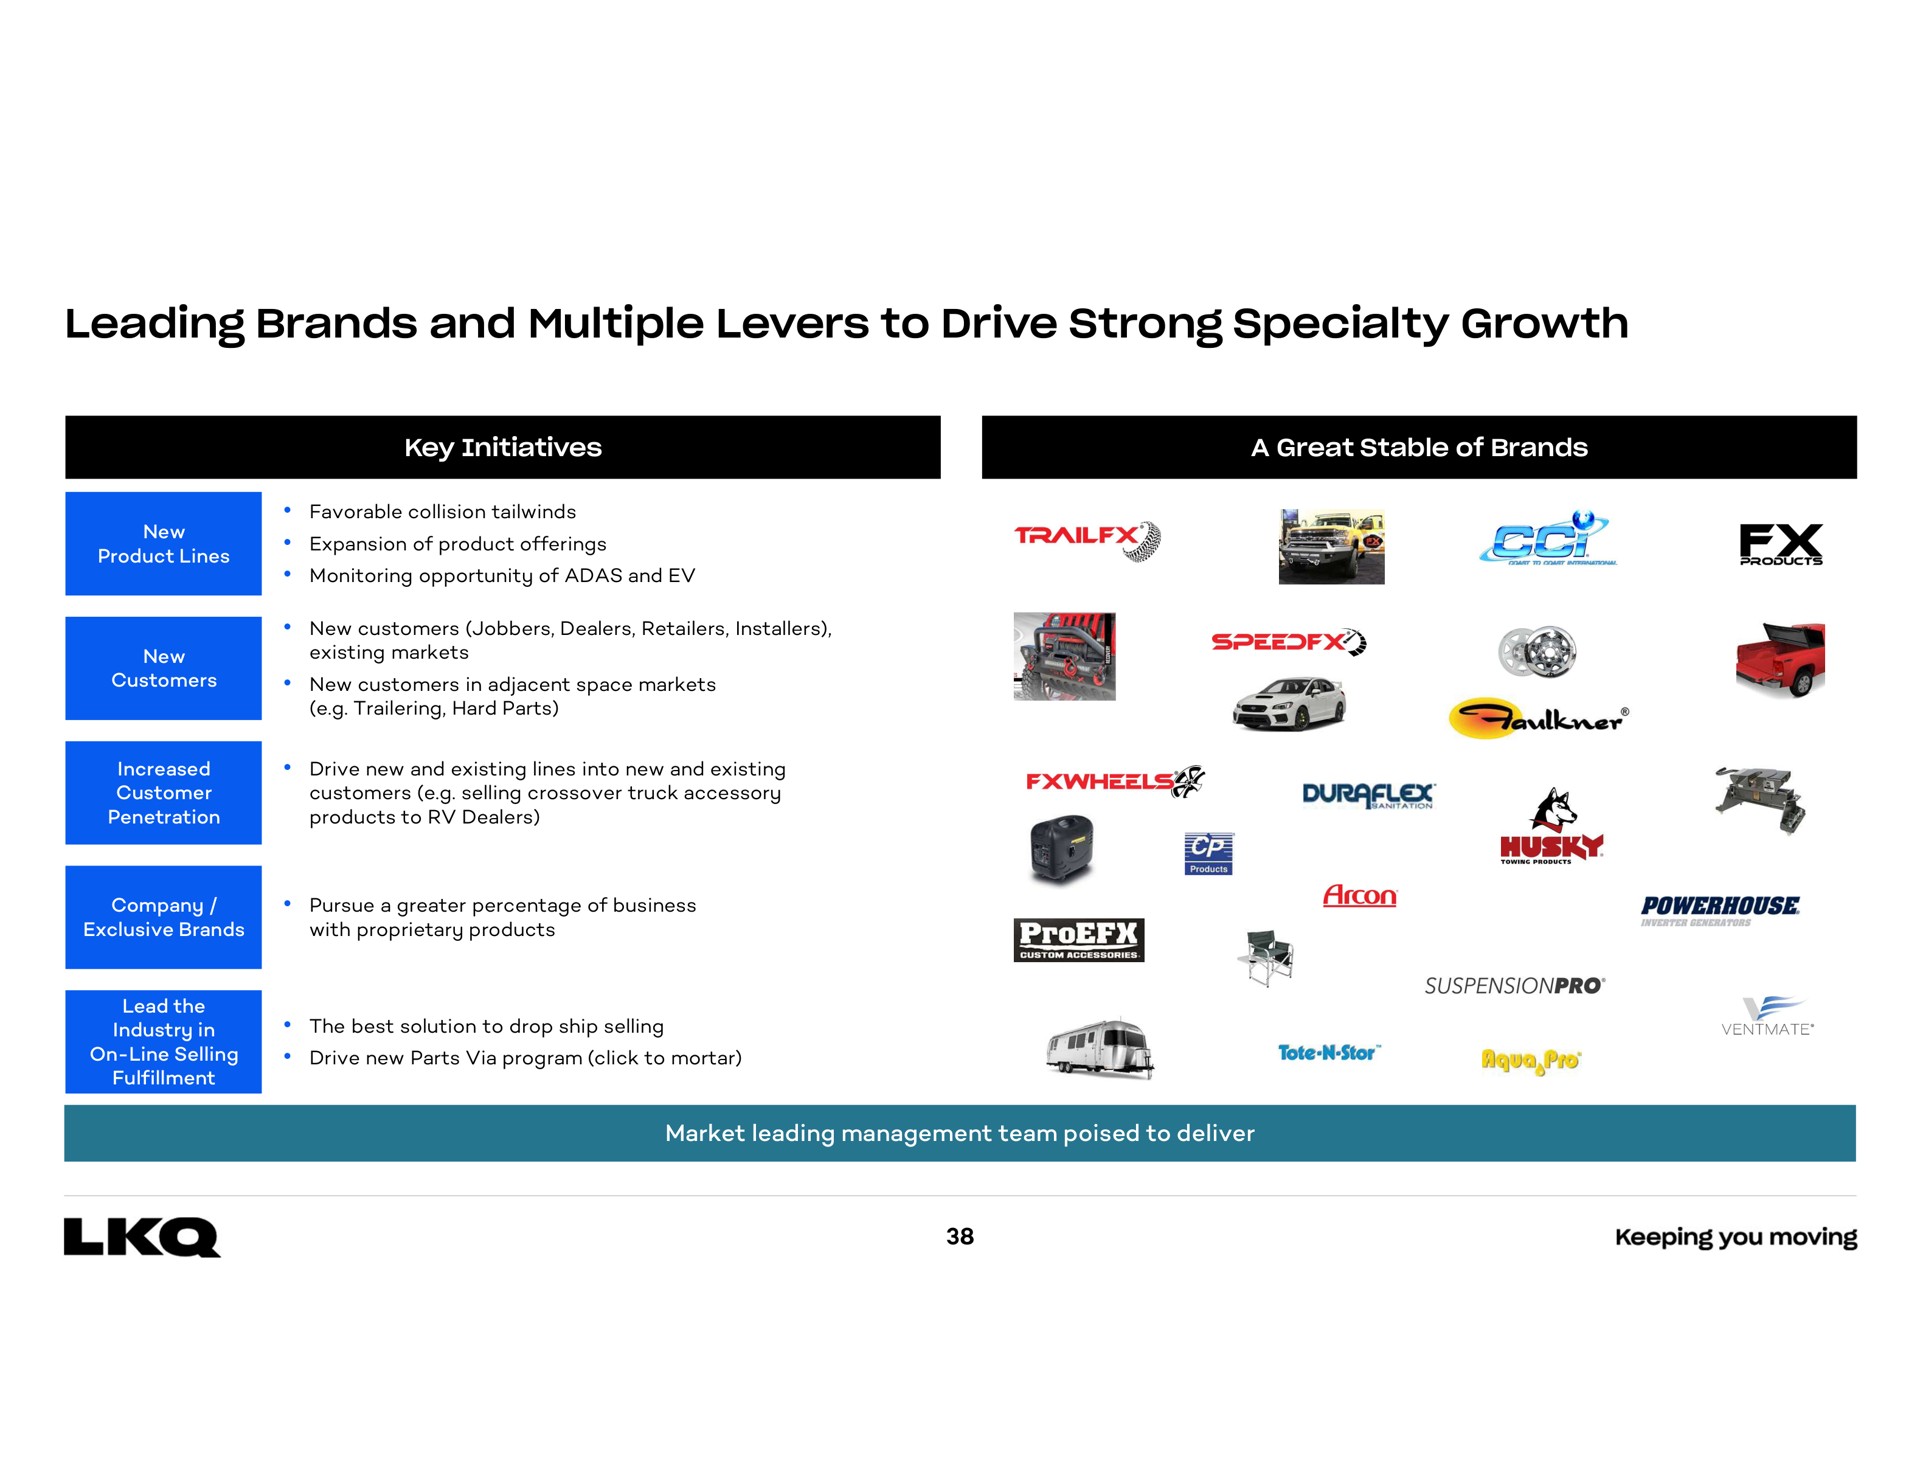 leading brands and multiple levers to drive strong specialty growth | LKQ